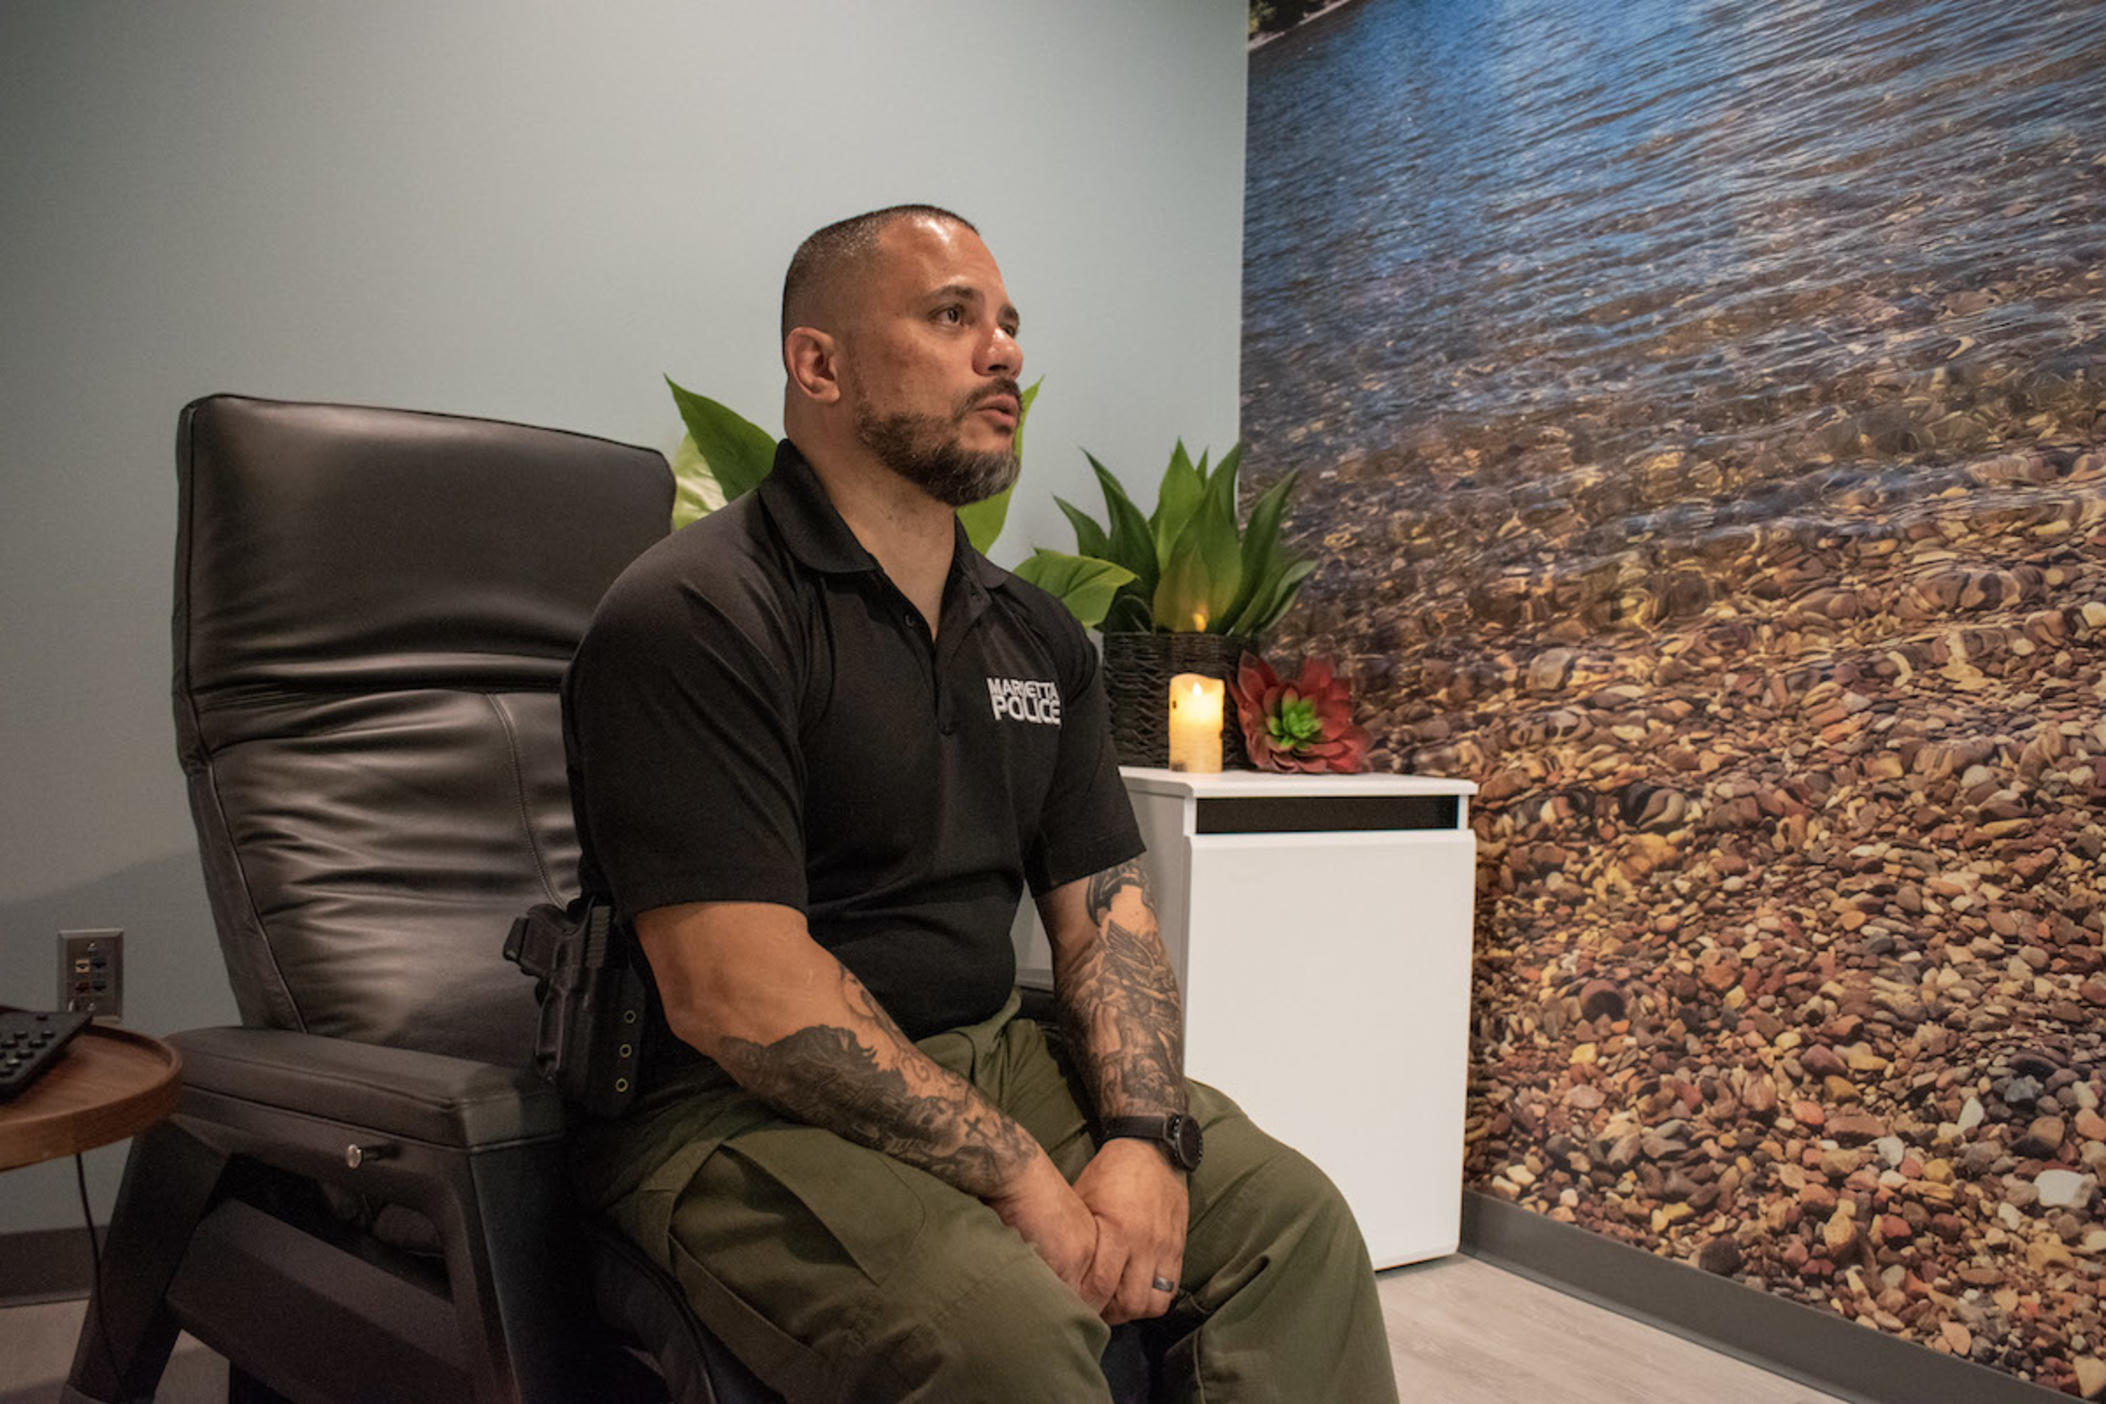 Marietta Police Department Sgt. Ray Figueroa sits in the headquarters’ new wellness room, which officers have dubbed the "Zen den." Departments across the country are placing more emphasis on officers’ mental health and well-being.